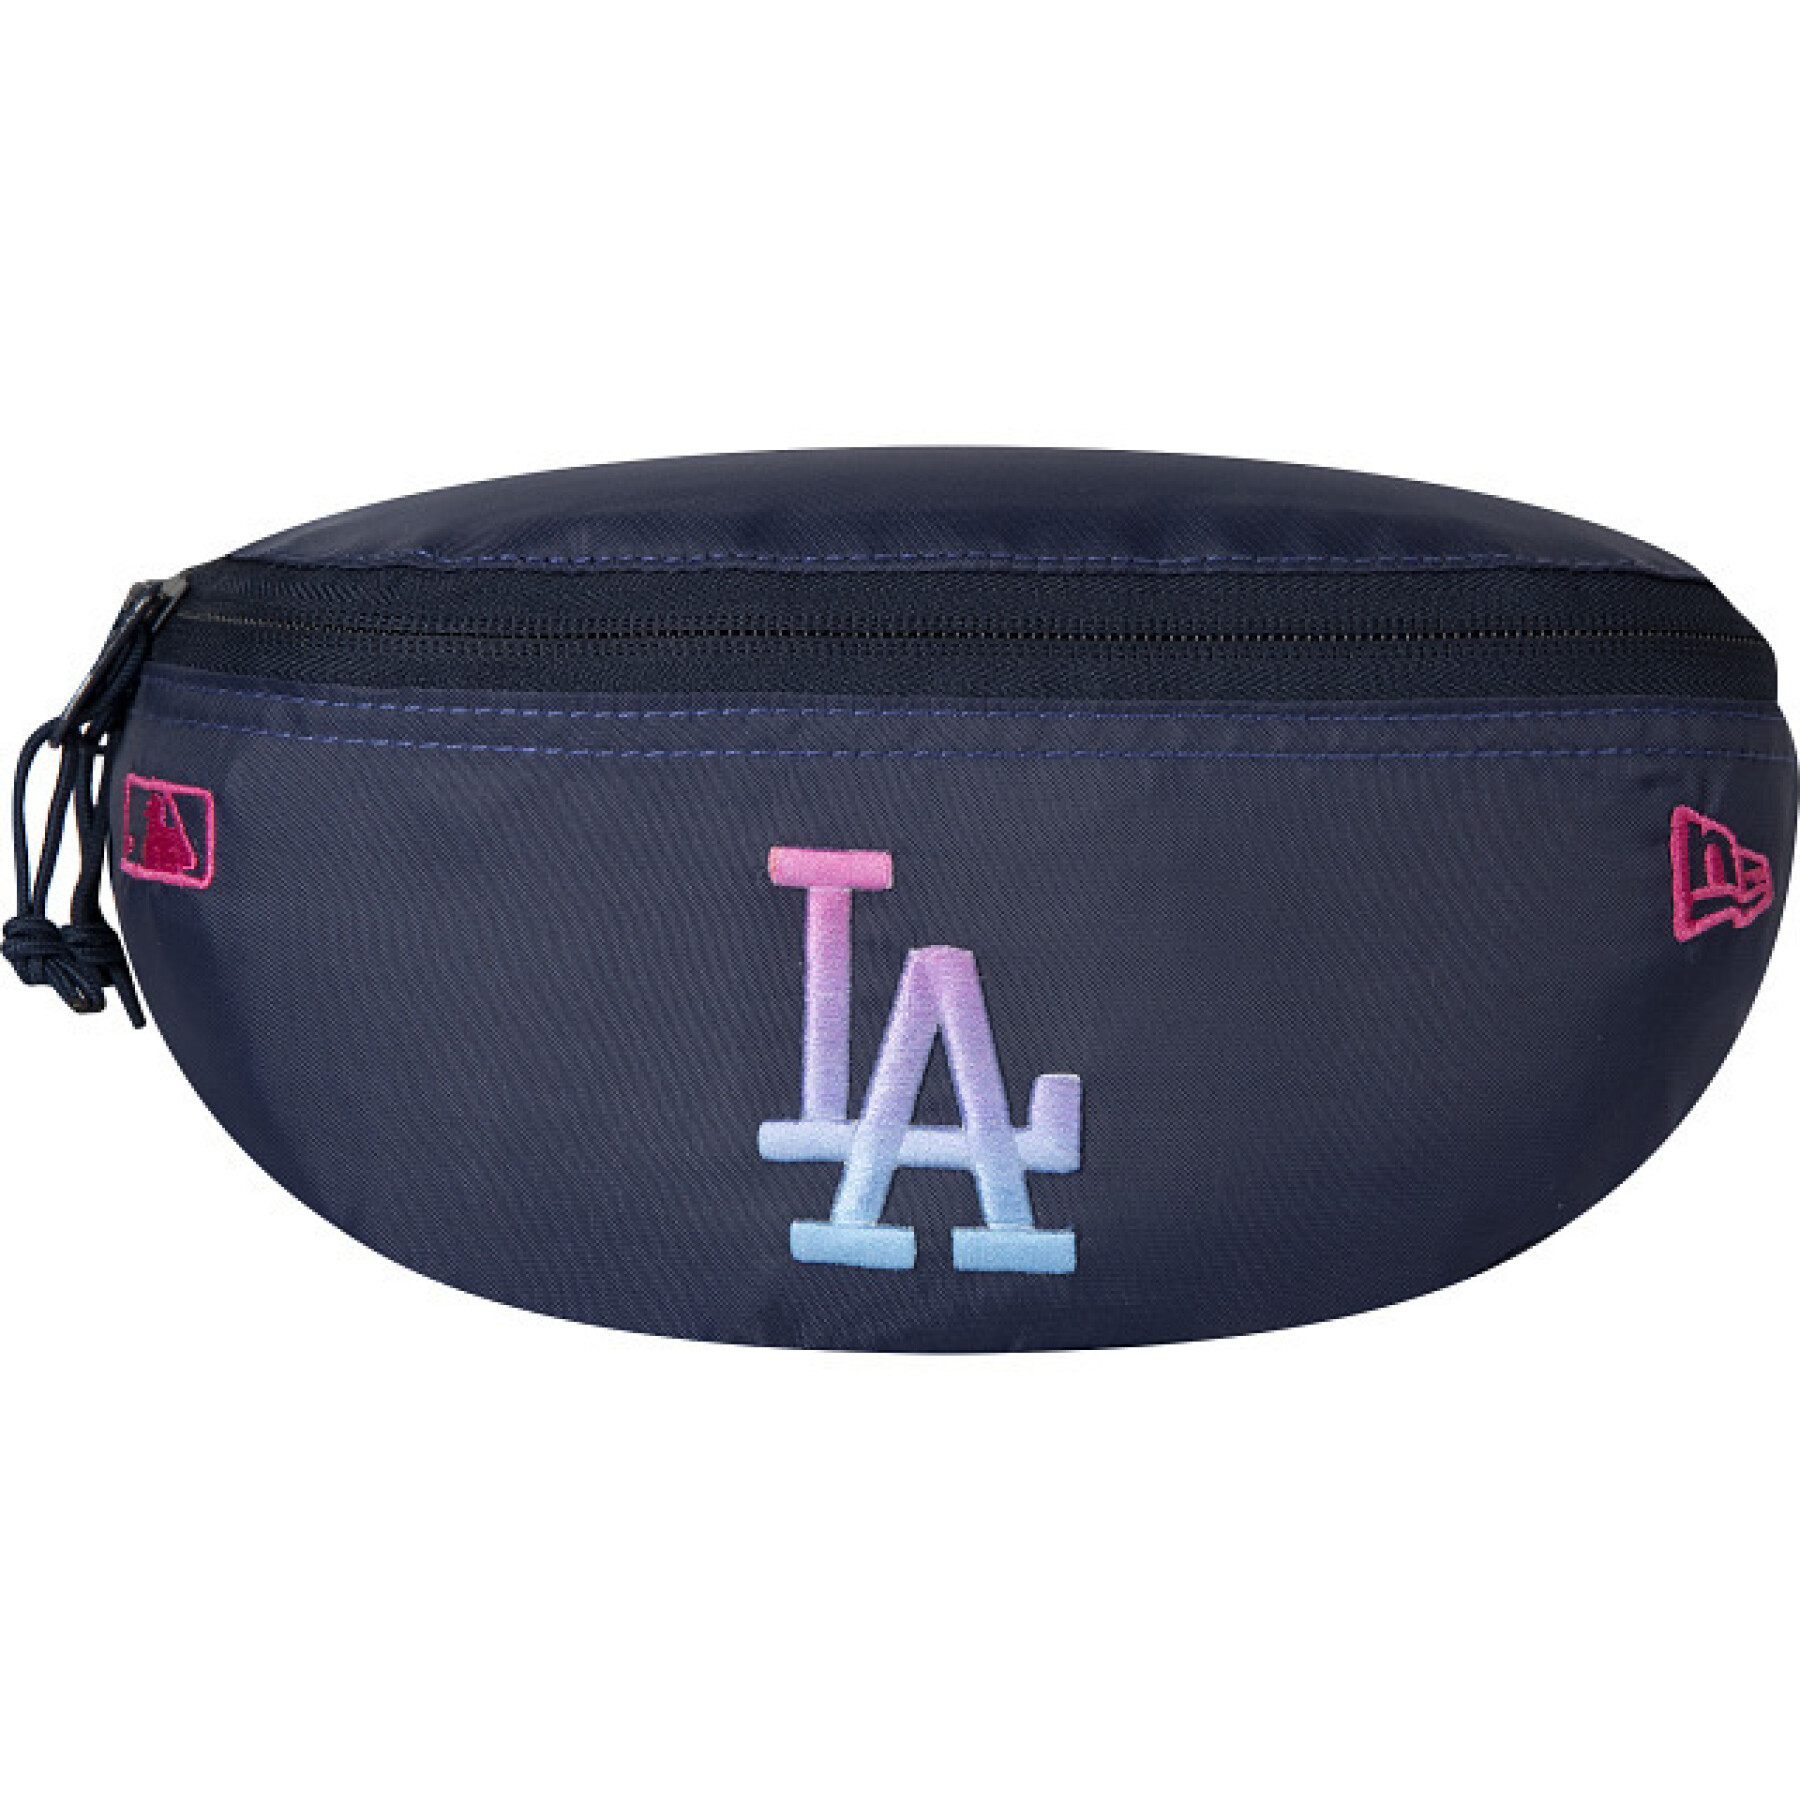 Fanny pack Los Angeles Dodgers MLB